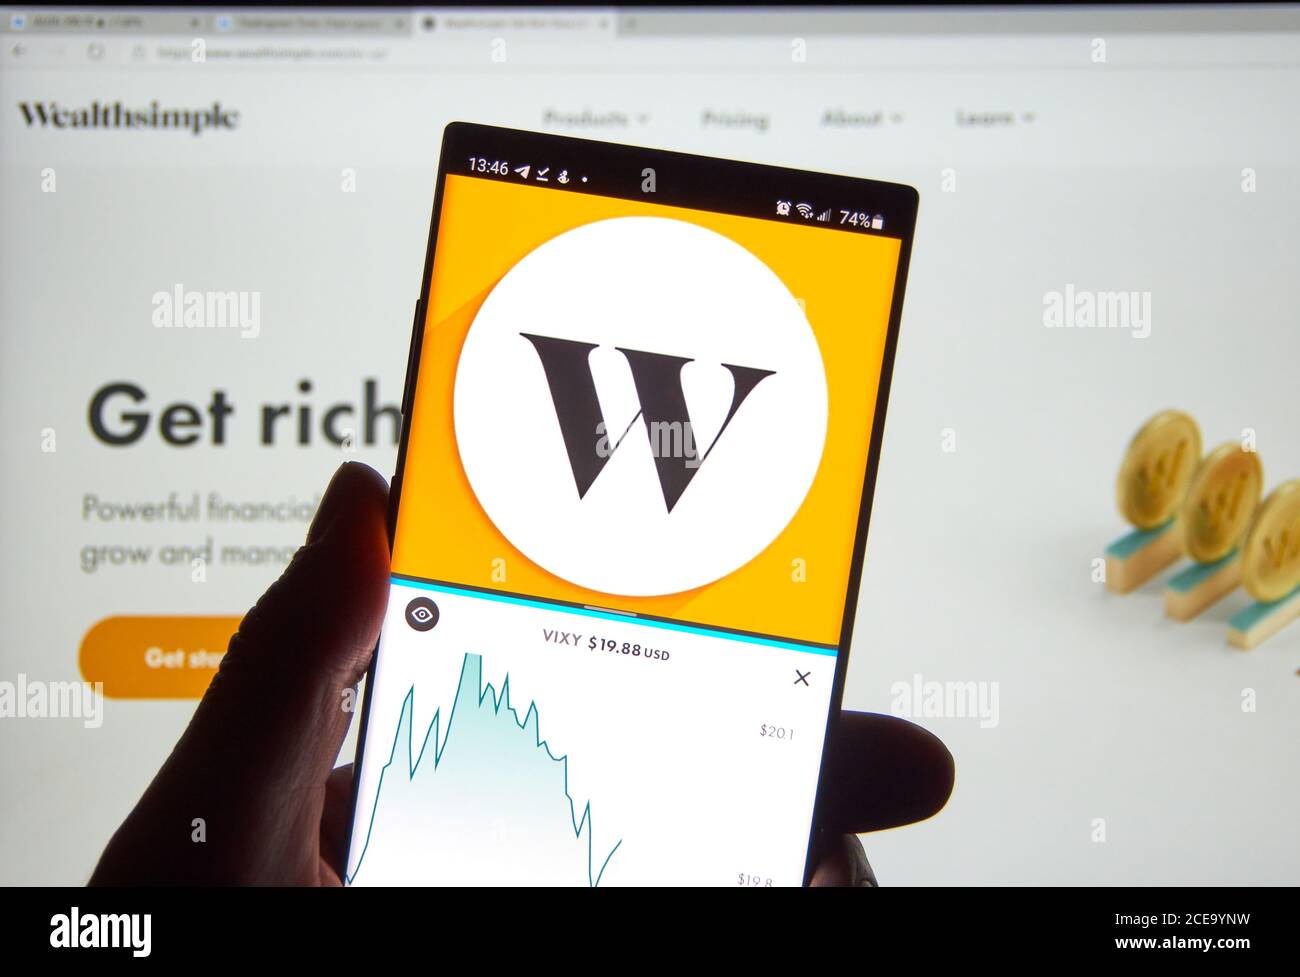 Montreal, Canada - August 28, 2020: Wealthsimple stock trading and smart investment android app on Note 10. Wealthsimple Inc. is a Canadian online inv Stock Photo